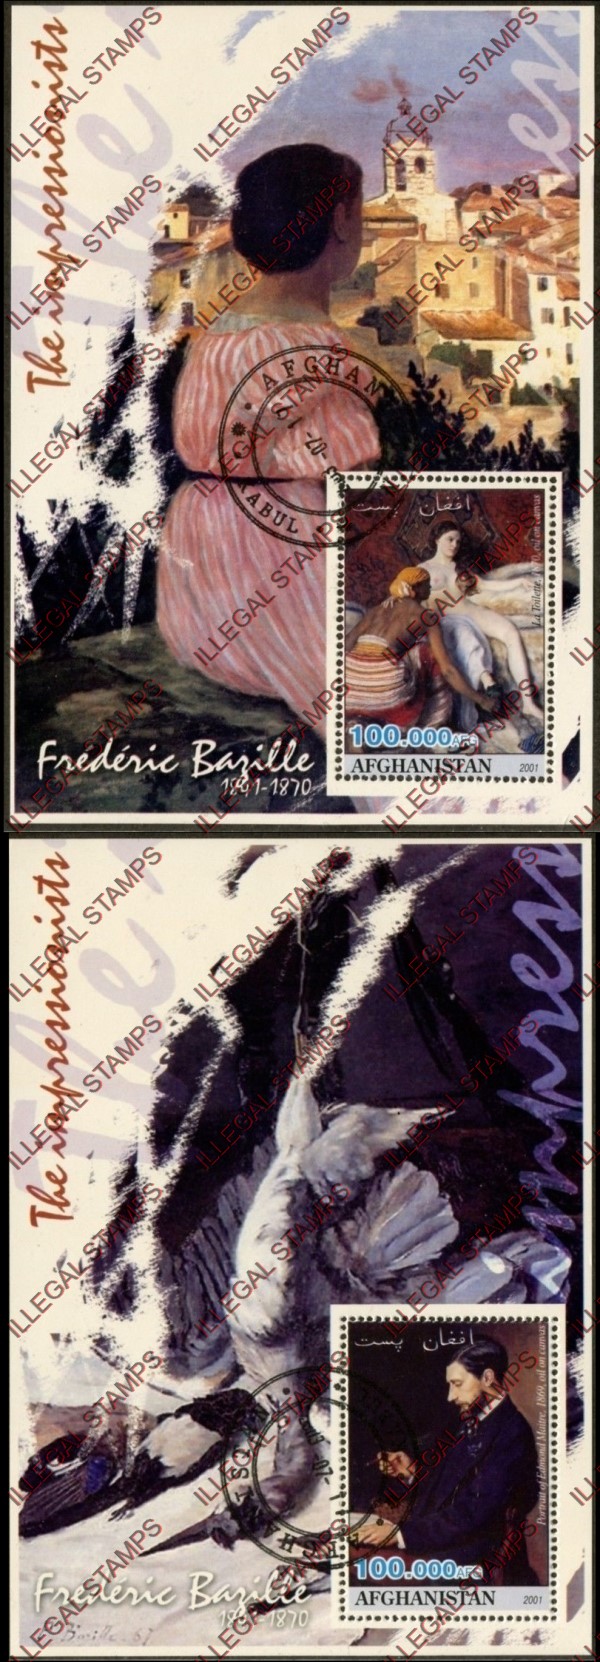 Afghanistan 2001 Impressionists Frederic Bazzila Illegal Stamp Souvenir Sheets of One